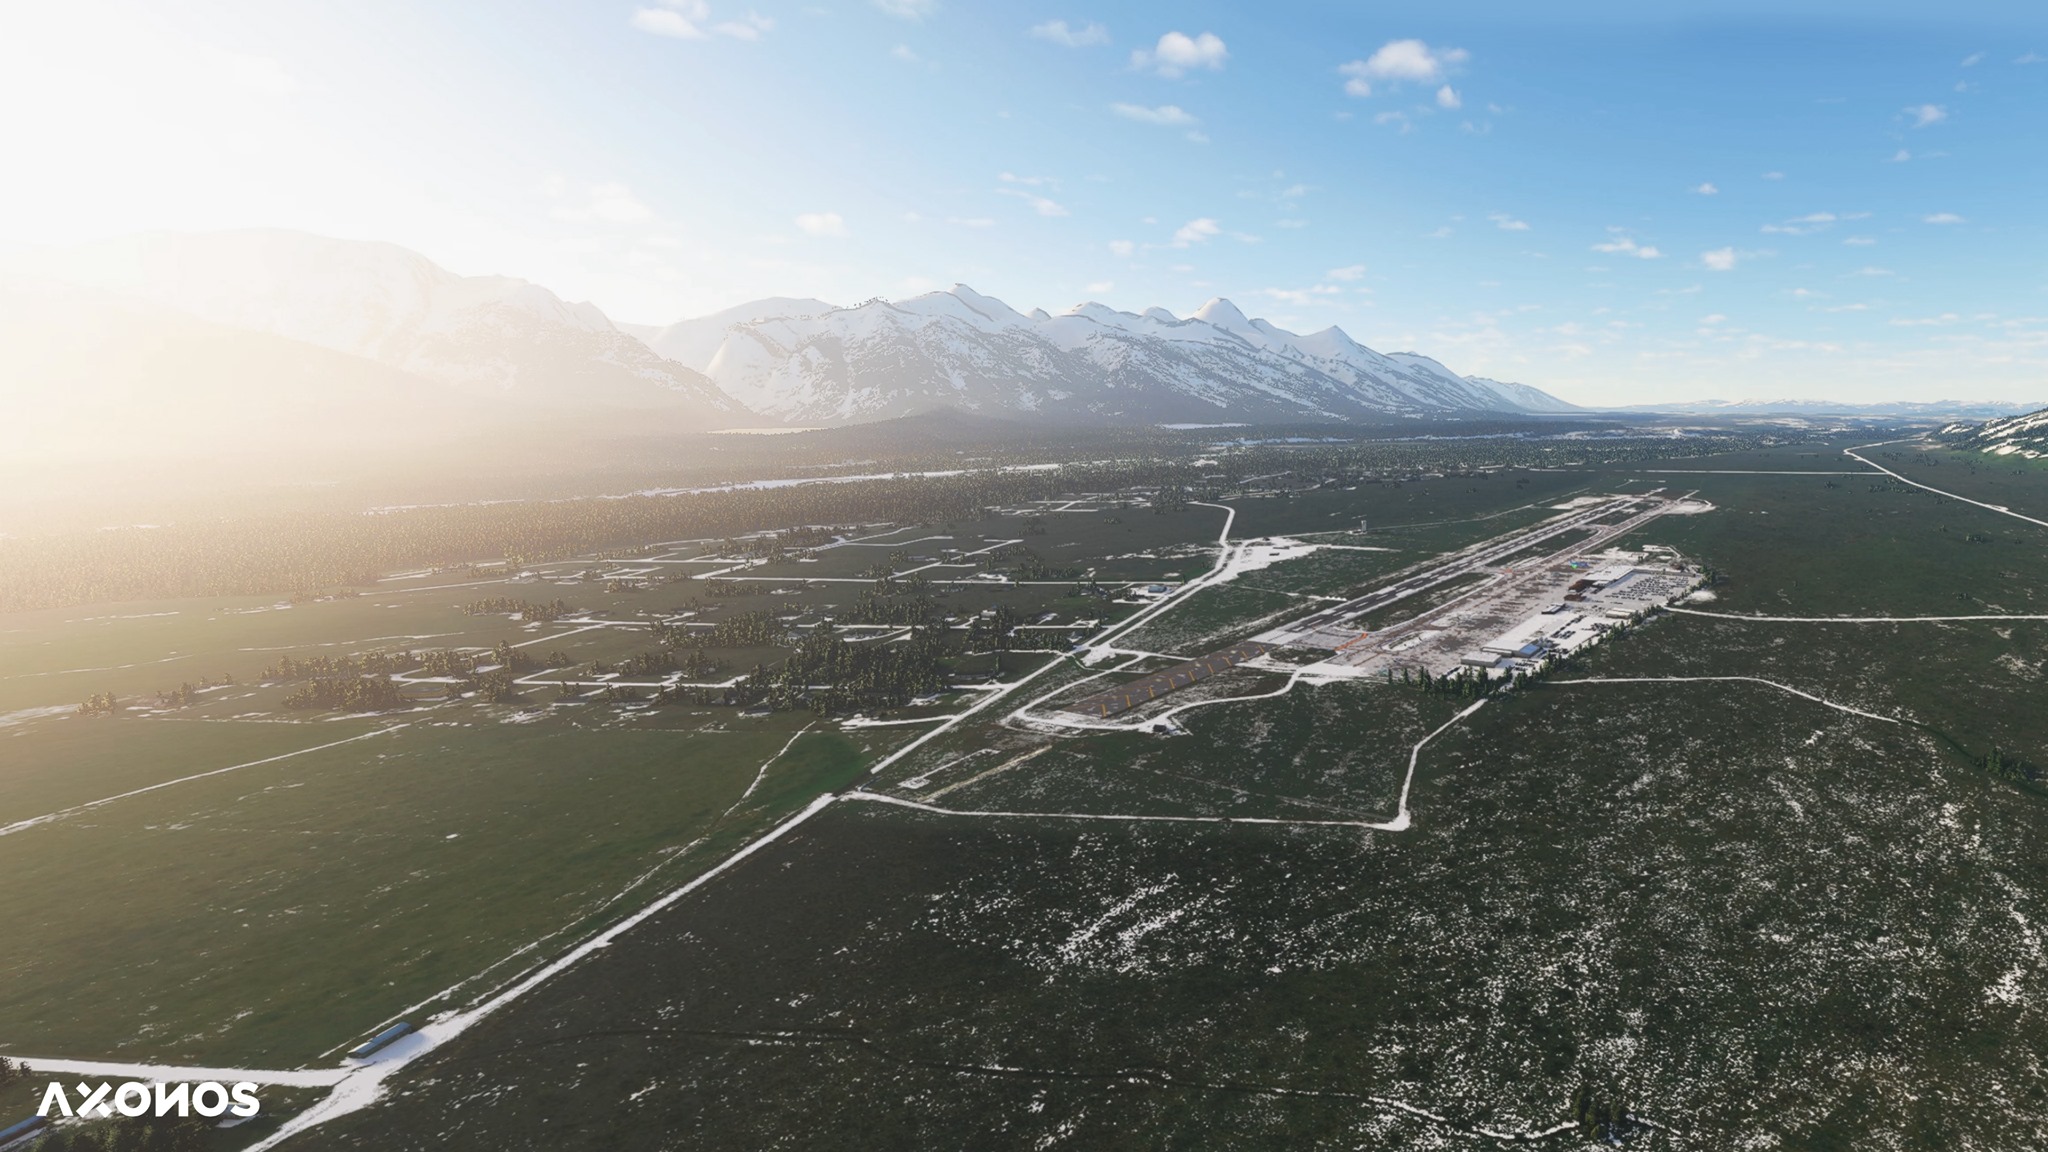 Axonos Releases Jackson Hole for Microsoft Flight Simulator - Axonos, Microsoft Flight Simulator